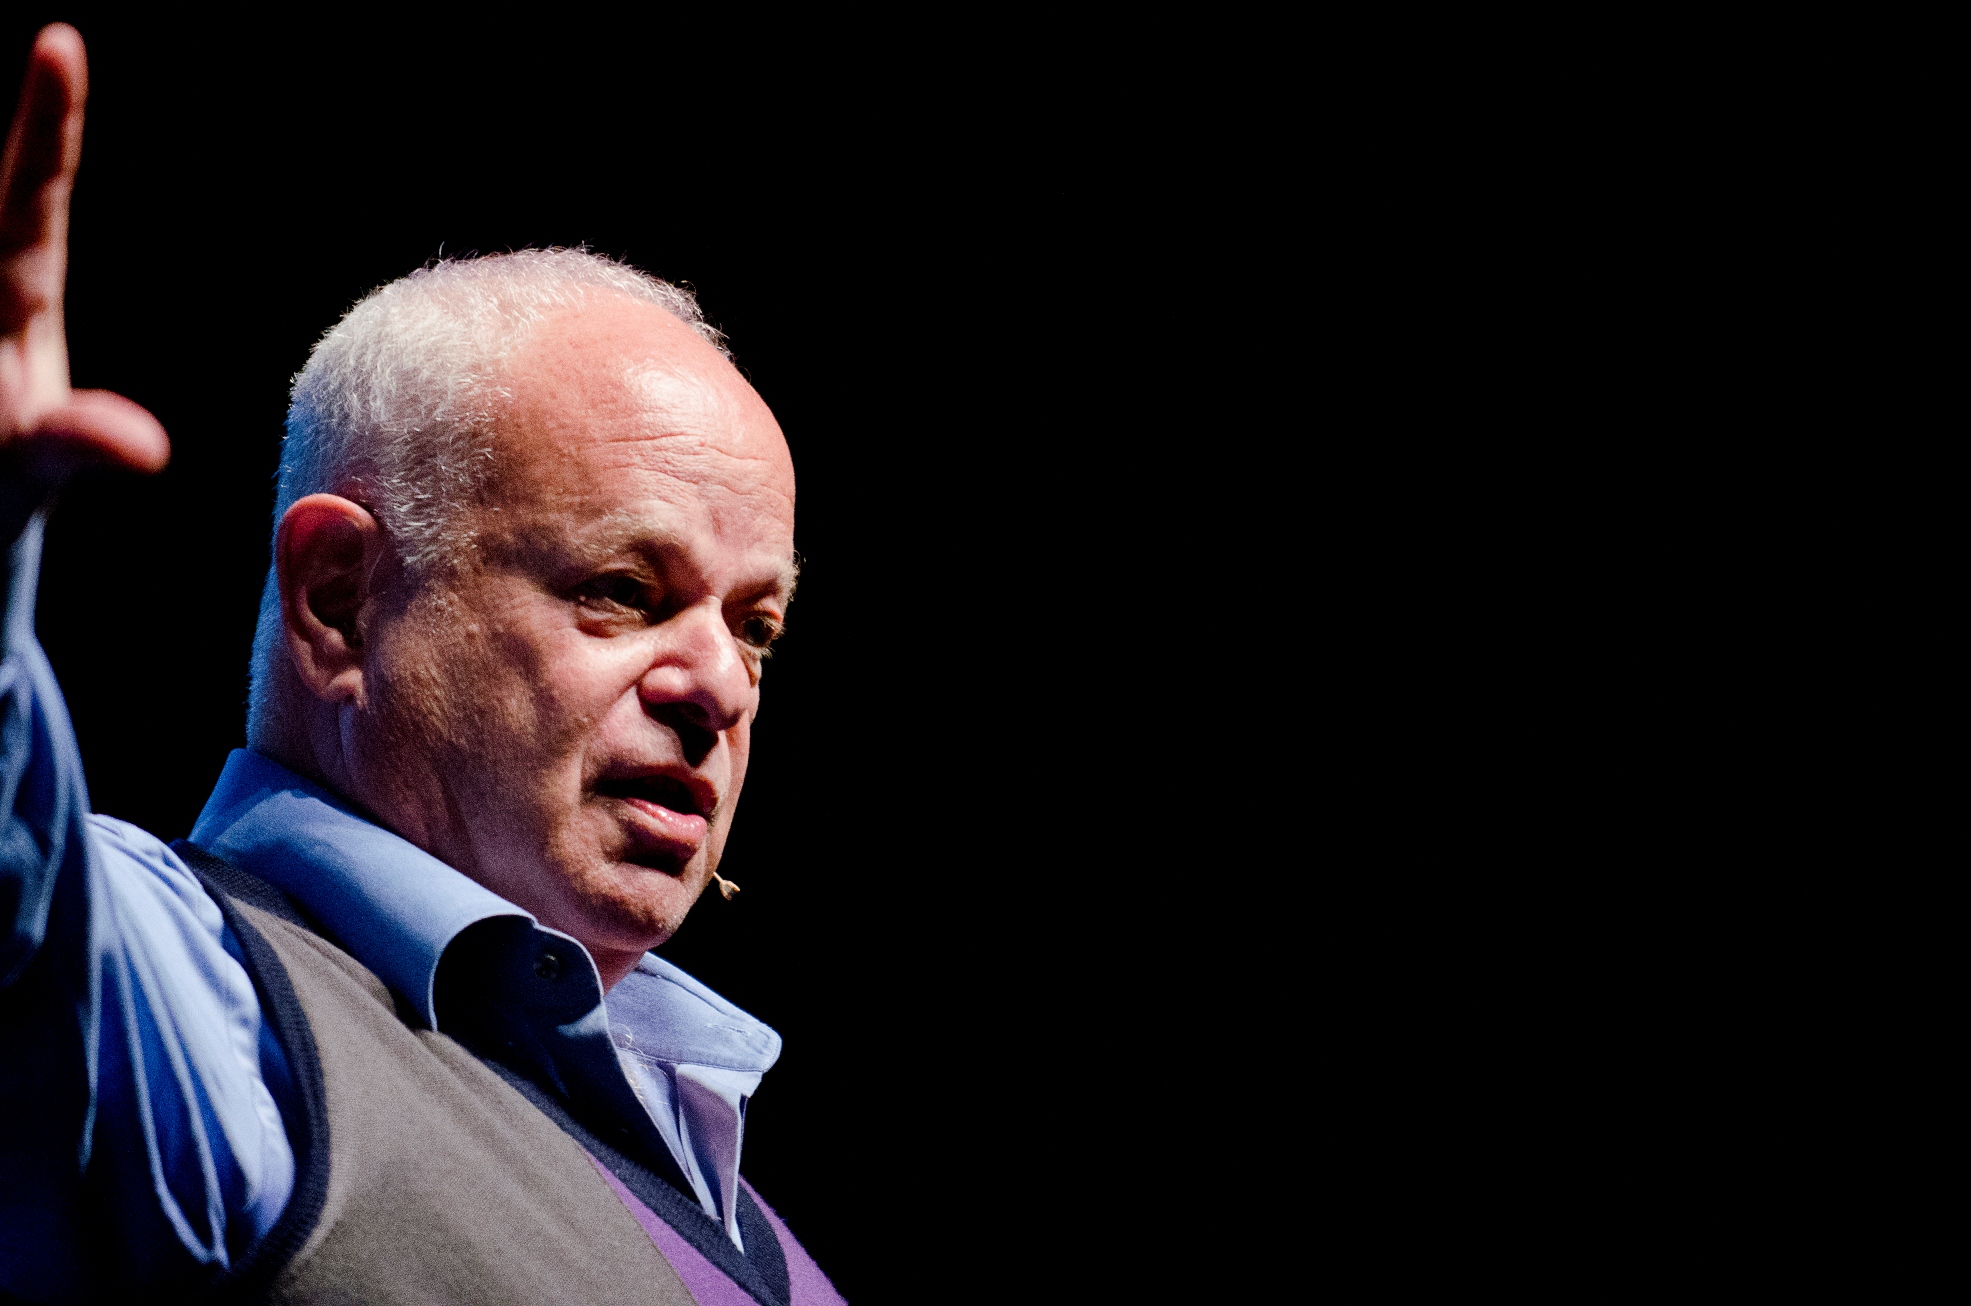 Professor martin seligman building the state of wellbeing